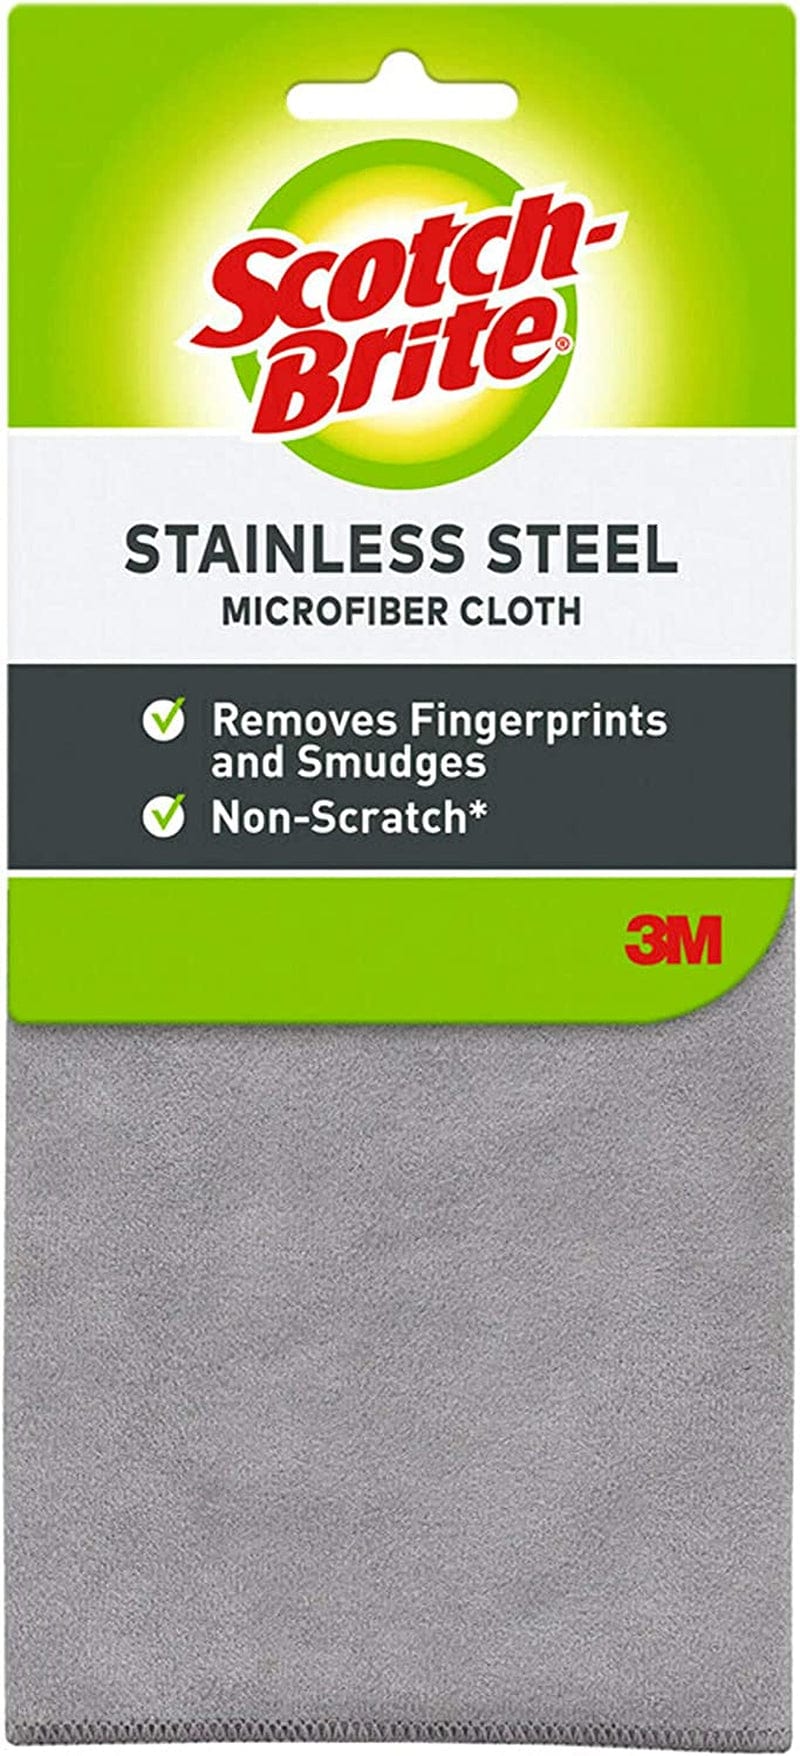 Scotch-Brite Stainless Steel Cleaning Cloth Home & Garden > Household Supplies > Household Cleaning Supplies 3M Corp   